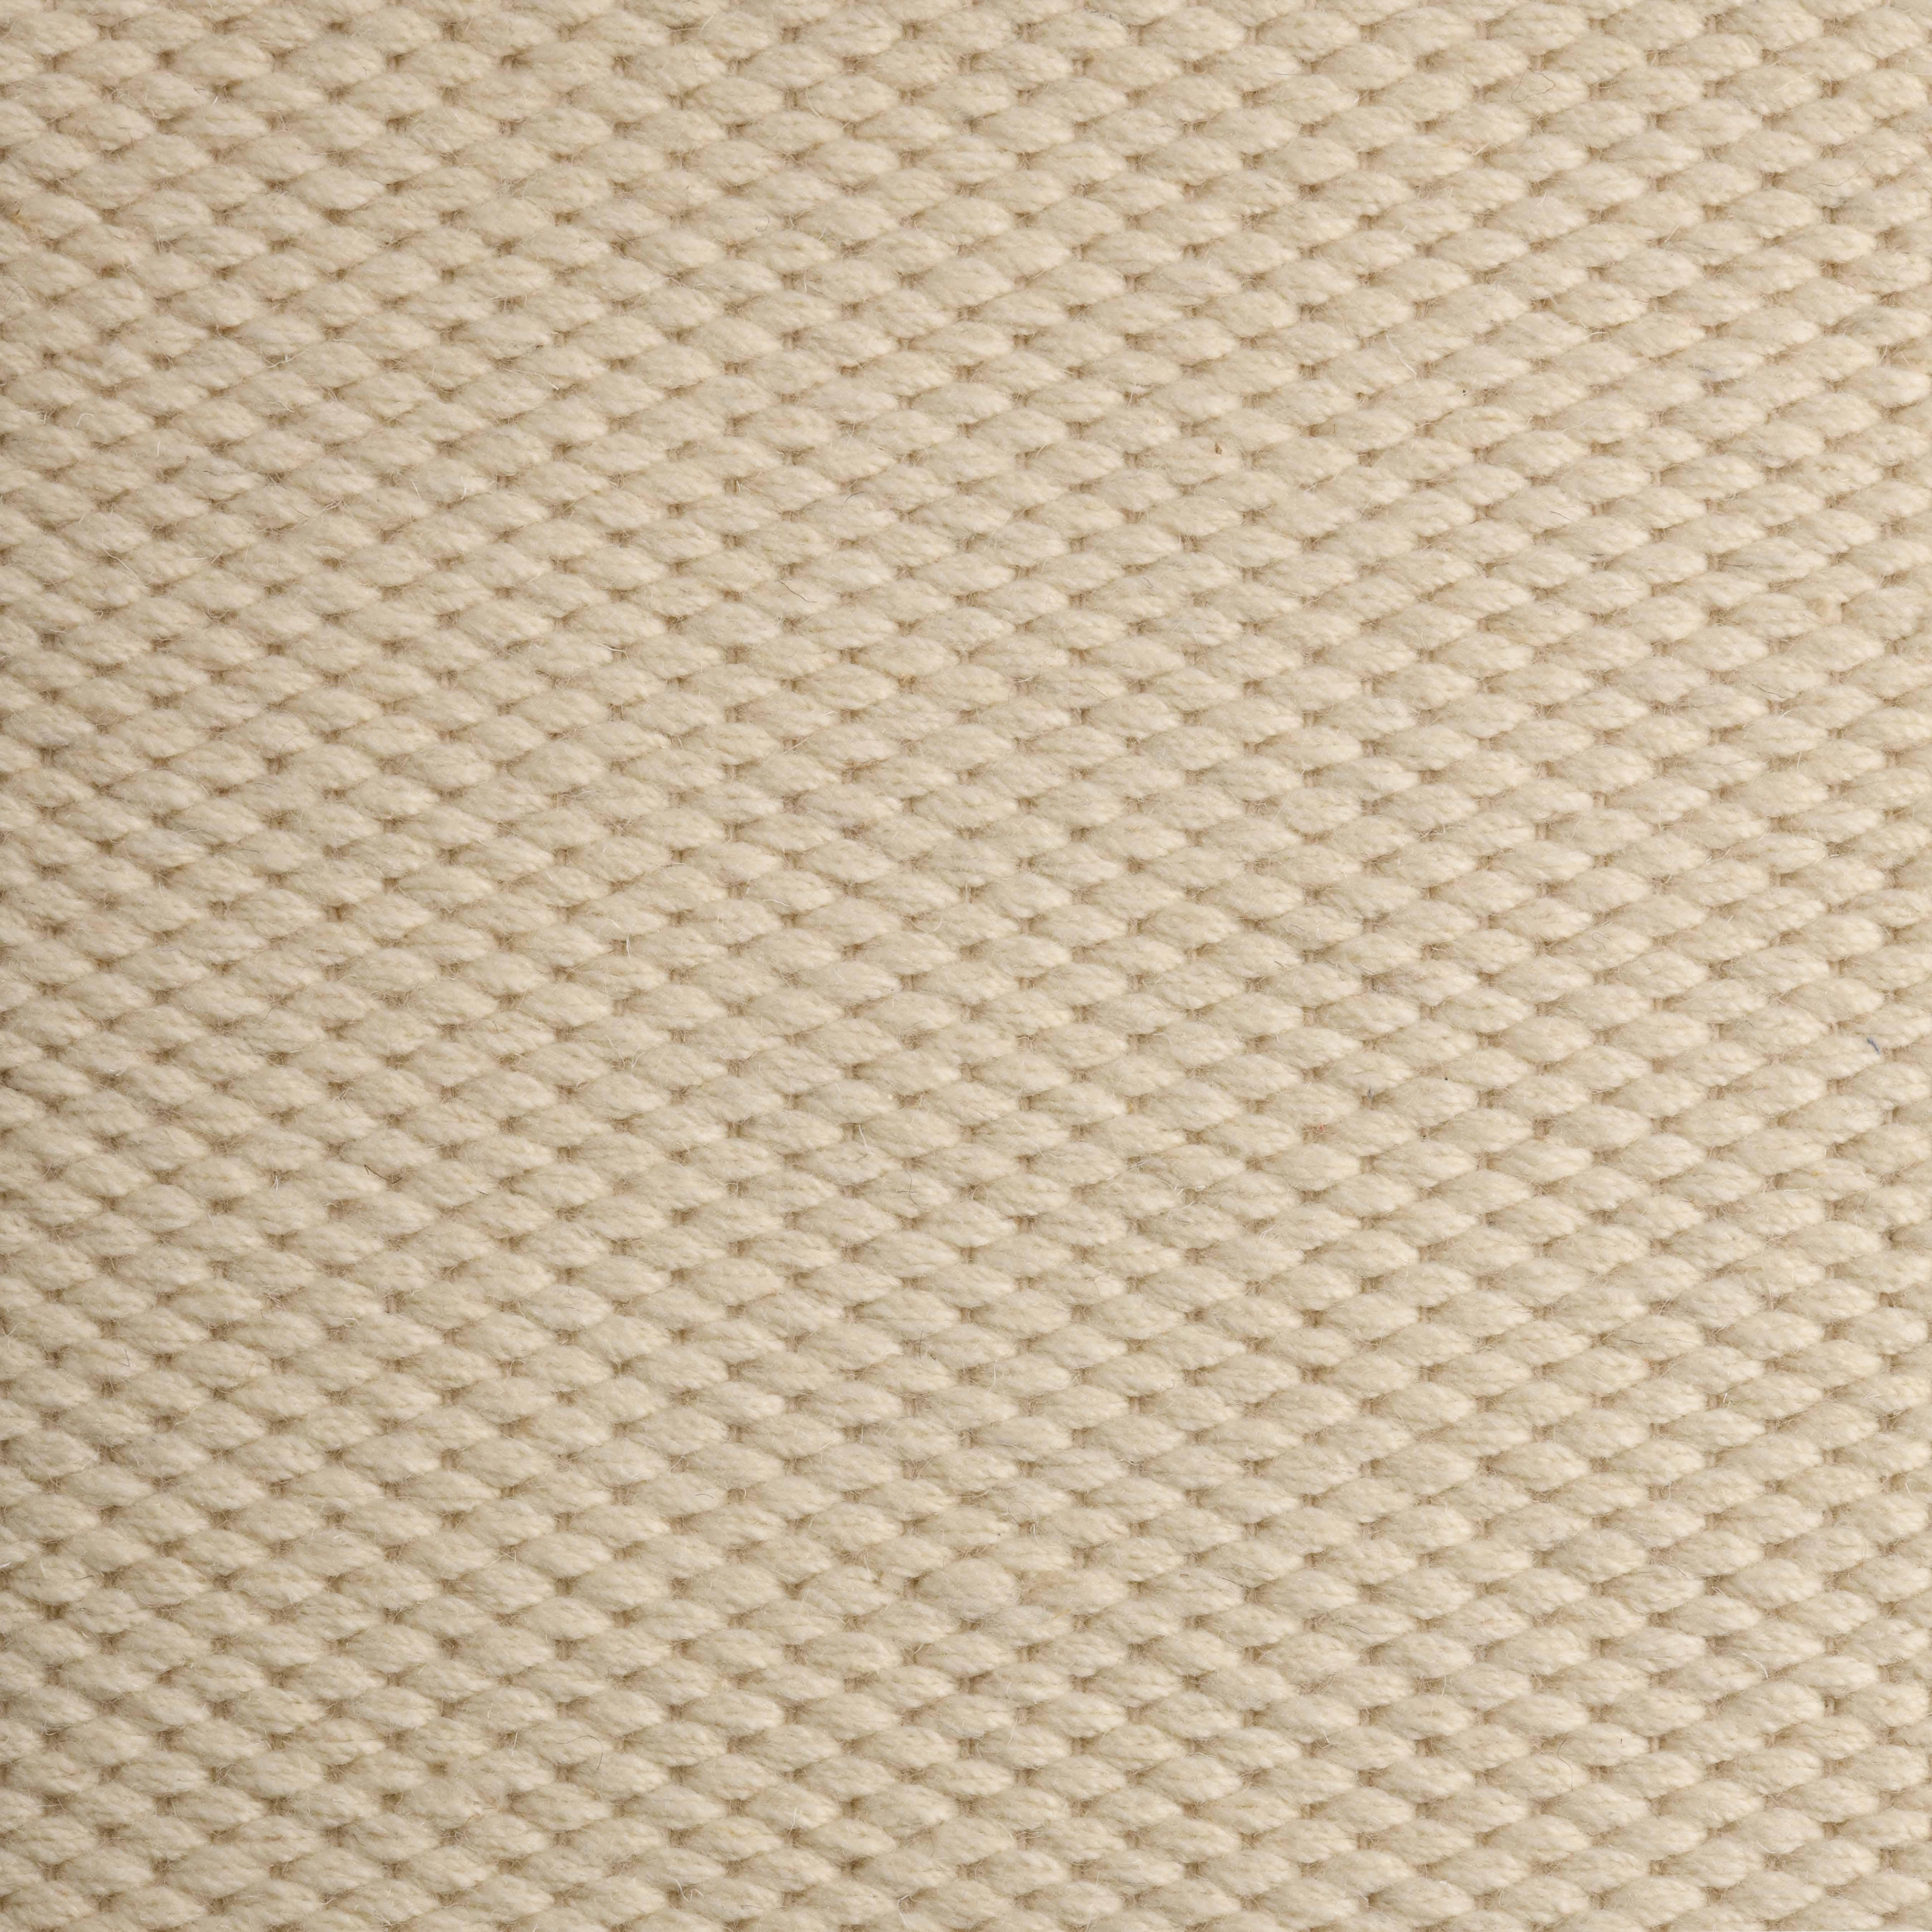 Quies, Ivory, Handwoven, New Zealand and Mediterranean wools, 6' x 9' For Sale